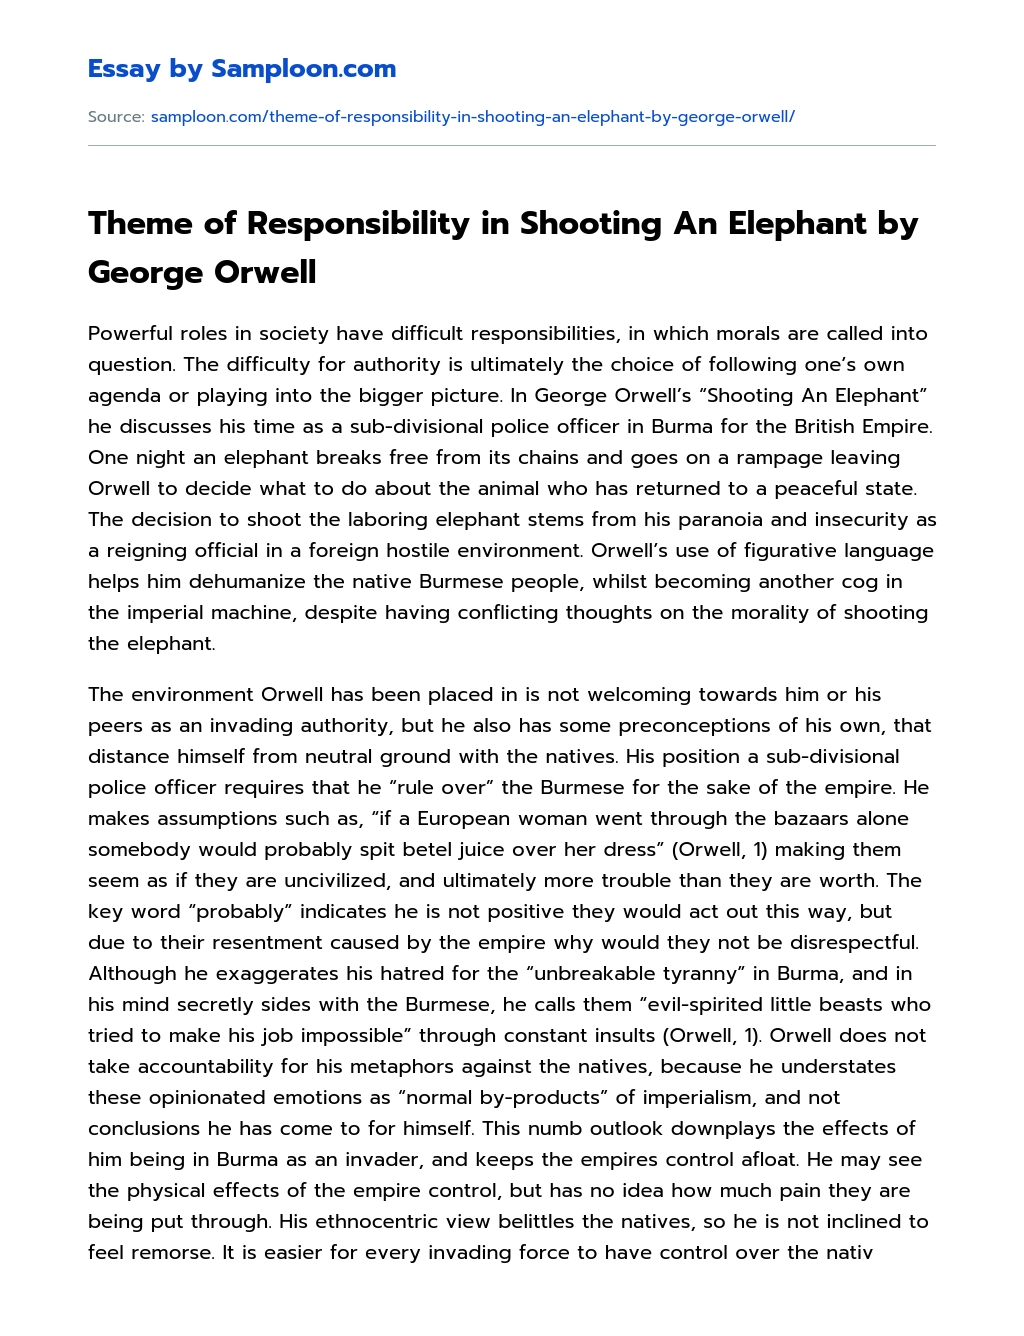 Theme of Responsibility in Shooting An Elephant by George Orwell essay